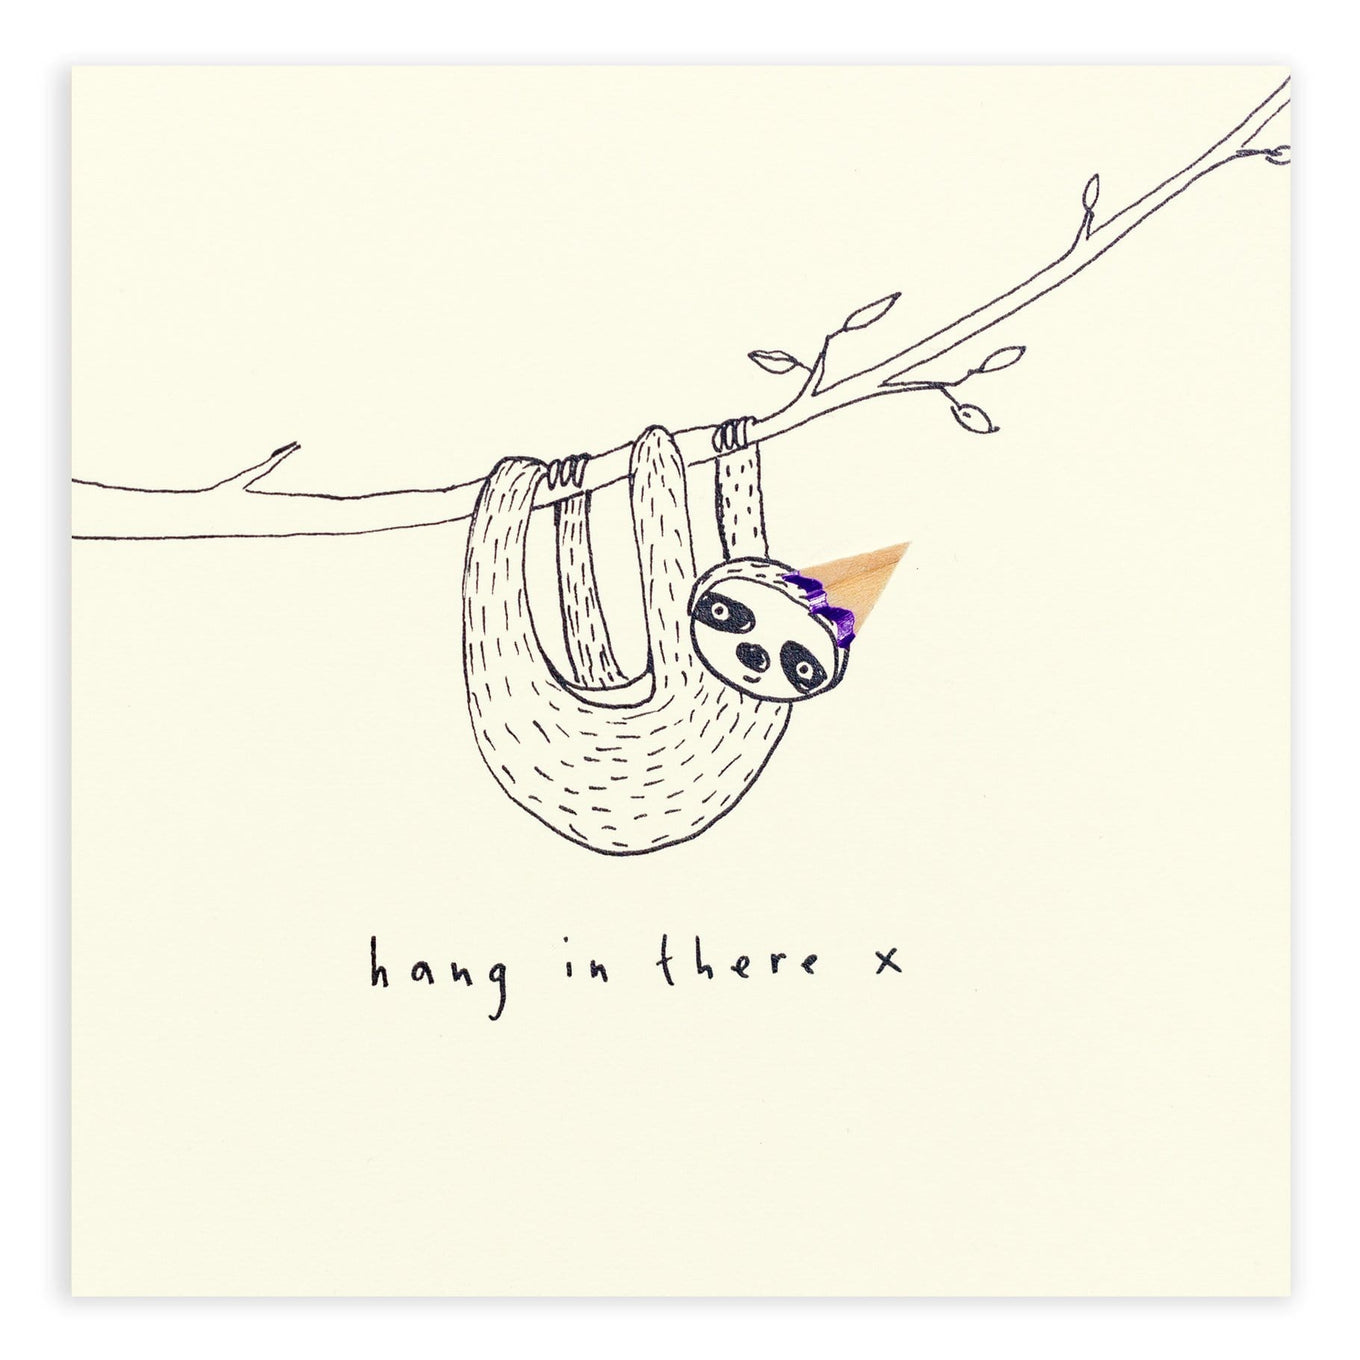 A drawing of a sloth hanging from a vine. The sloth wears a hat made of a purple pencil shaving. The card reads,"hang in there x"